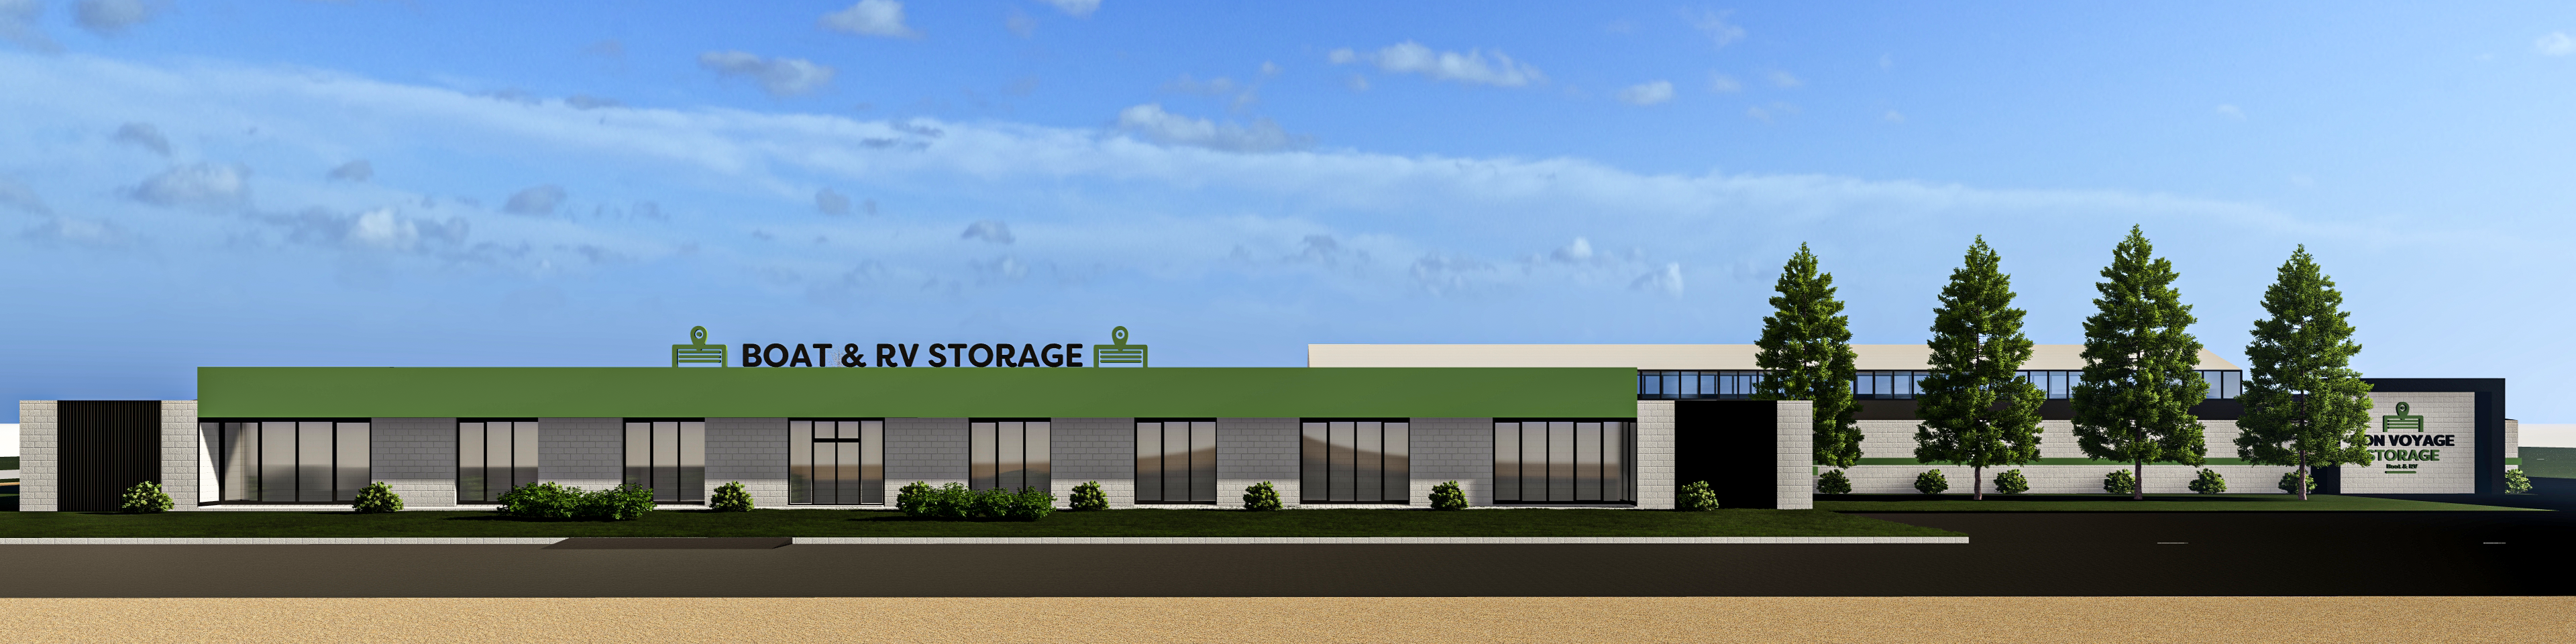 Front View Render of Bon Voyage Storage Renovation in Oglesby, Illinois, near Chicago.